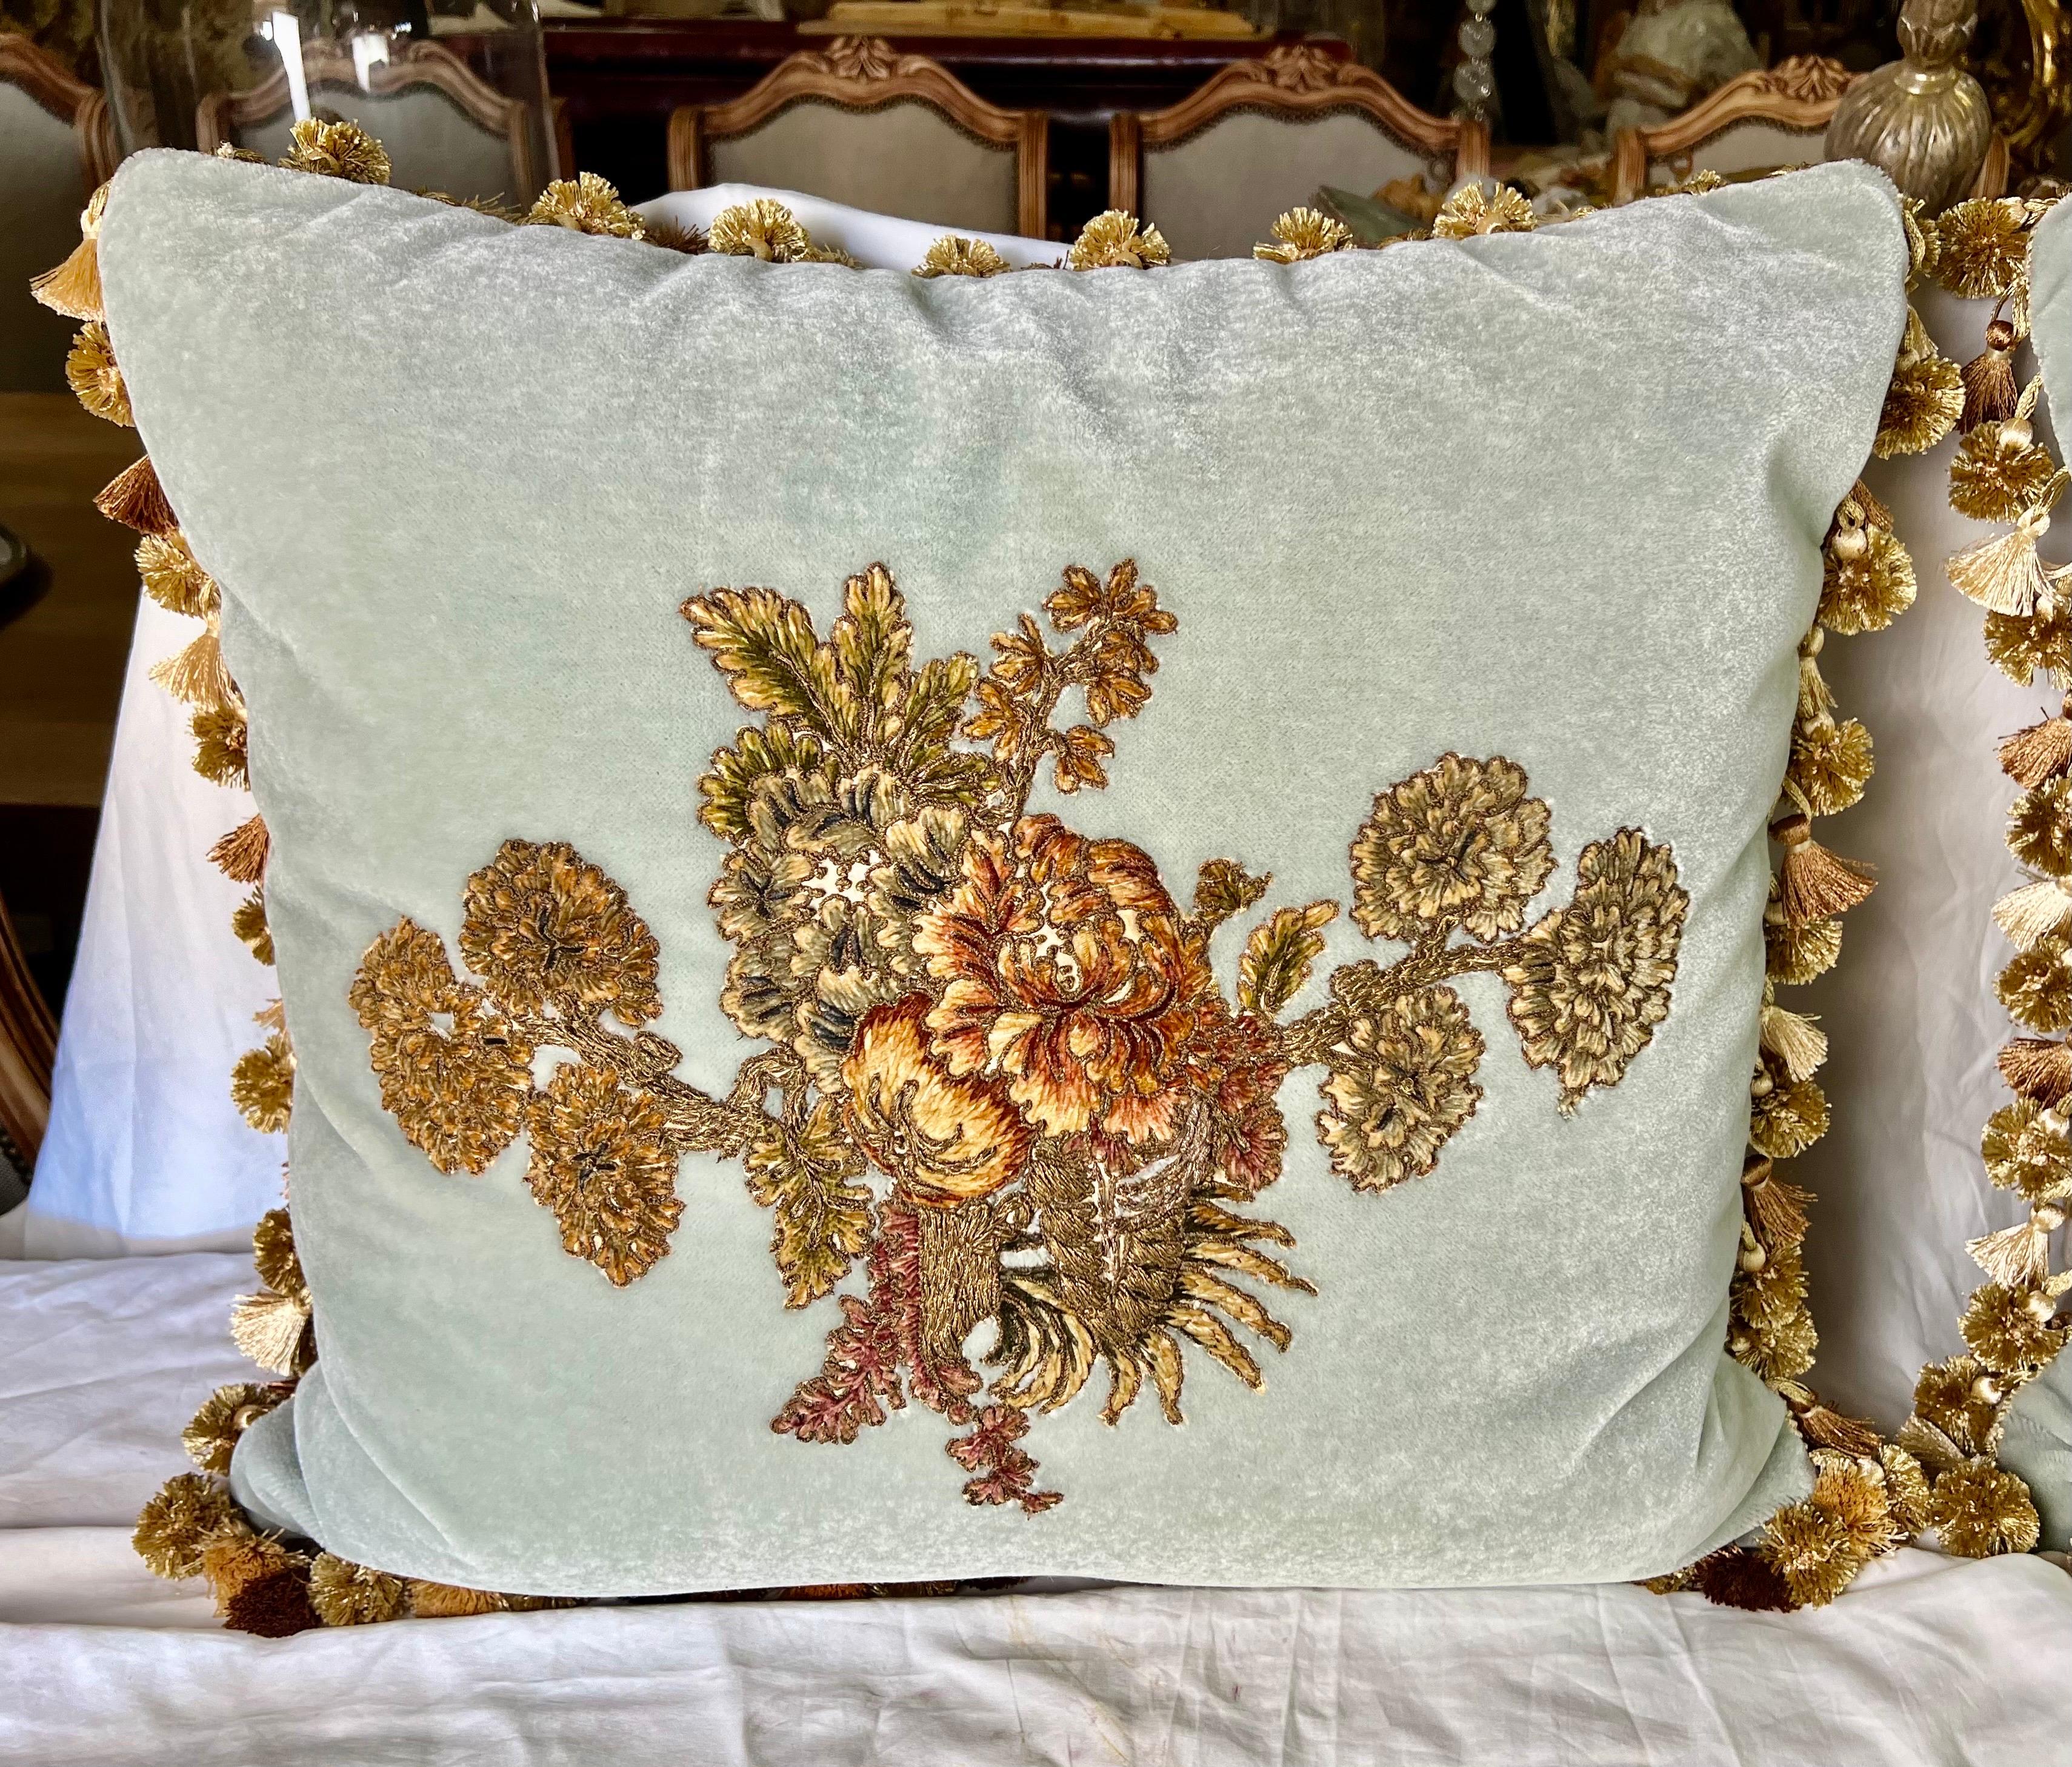 Custom pillows by Melissa Levinson, showcase 19th-century French metallic and chenille embroidered textiles on contemporary soft blue mohair backs.  The floral motifs, including hydrangeas and roses, along with the multi-colored fringe, add a touch